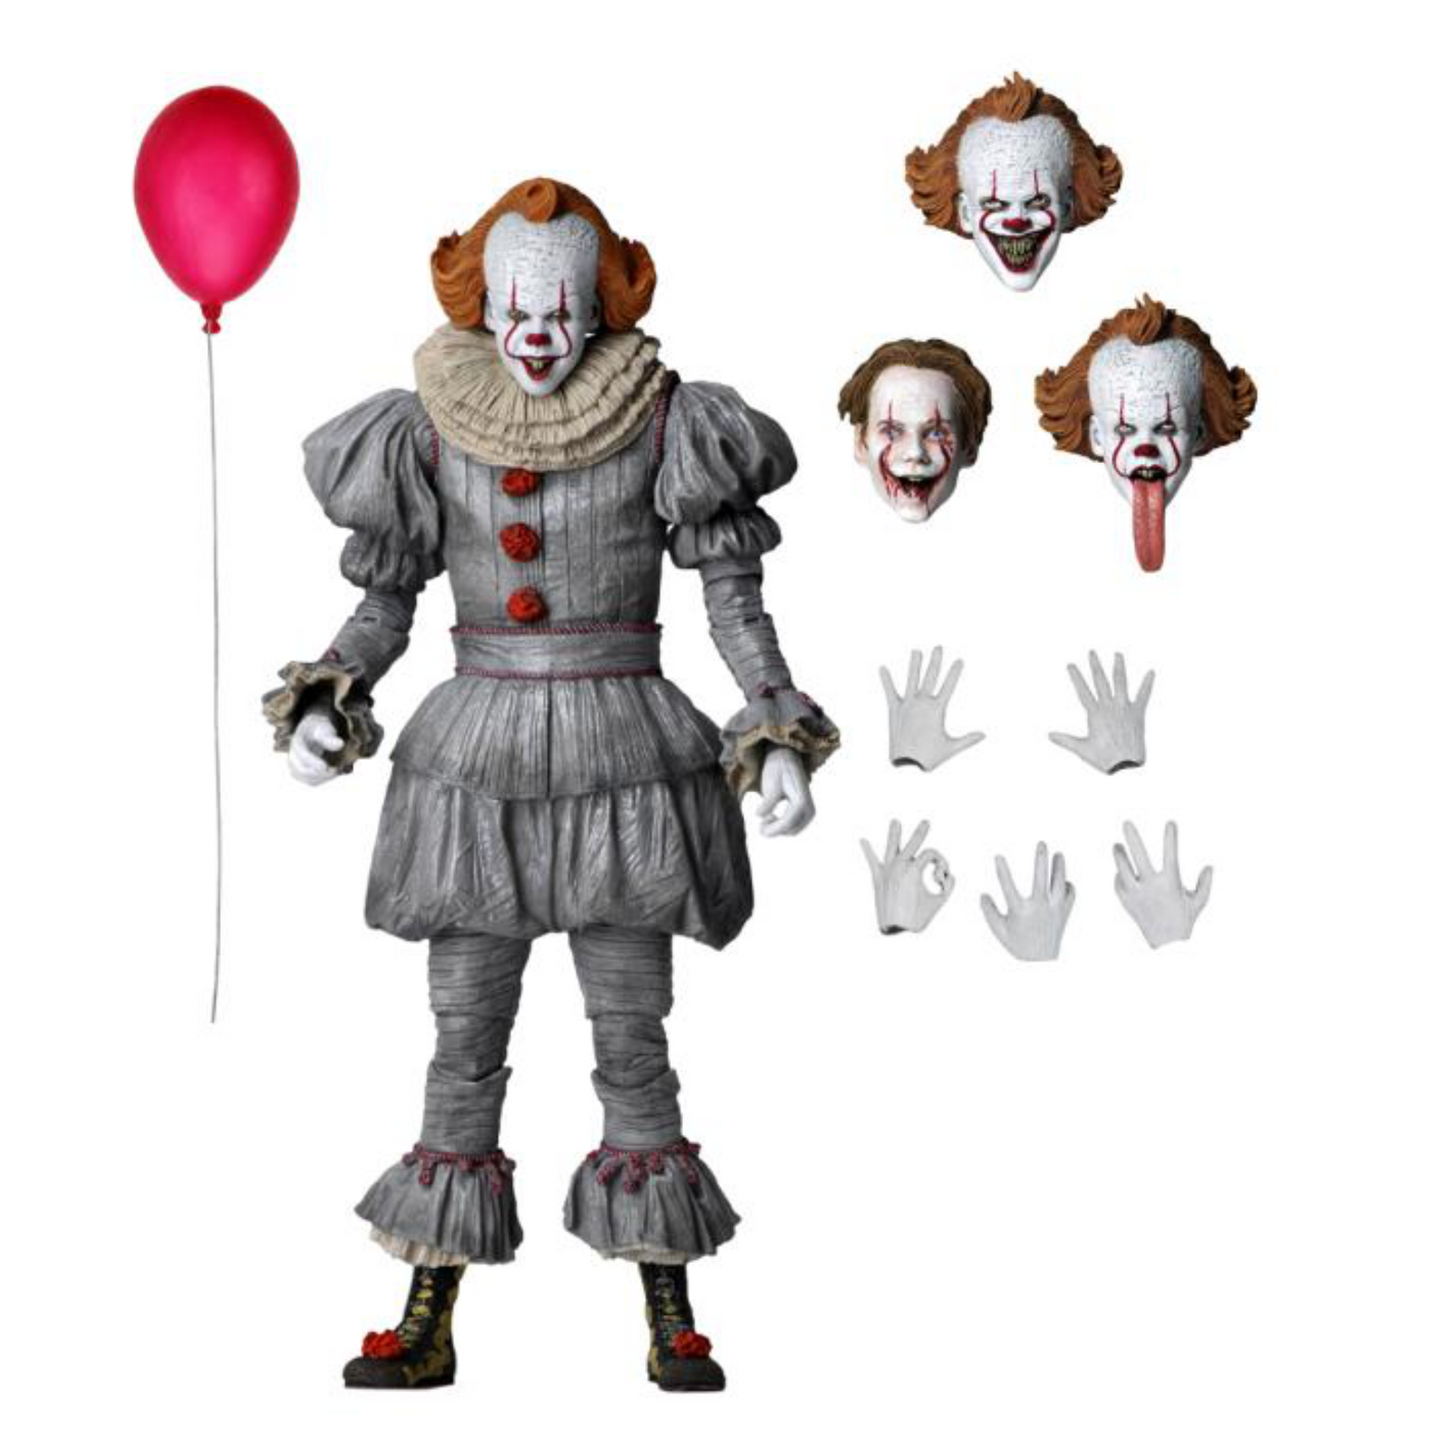 It: Chapter Two - Pennywise Ultimate 7” Action Figure